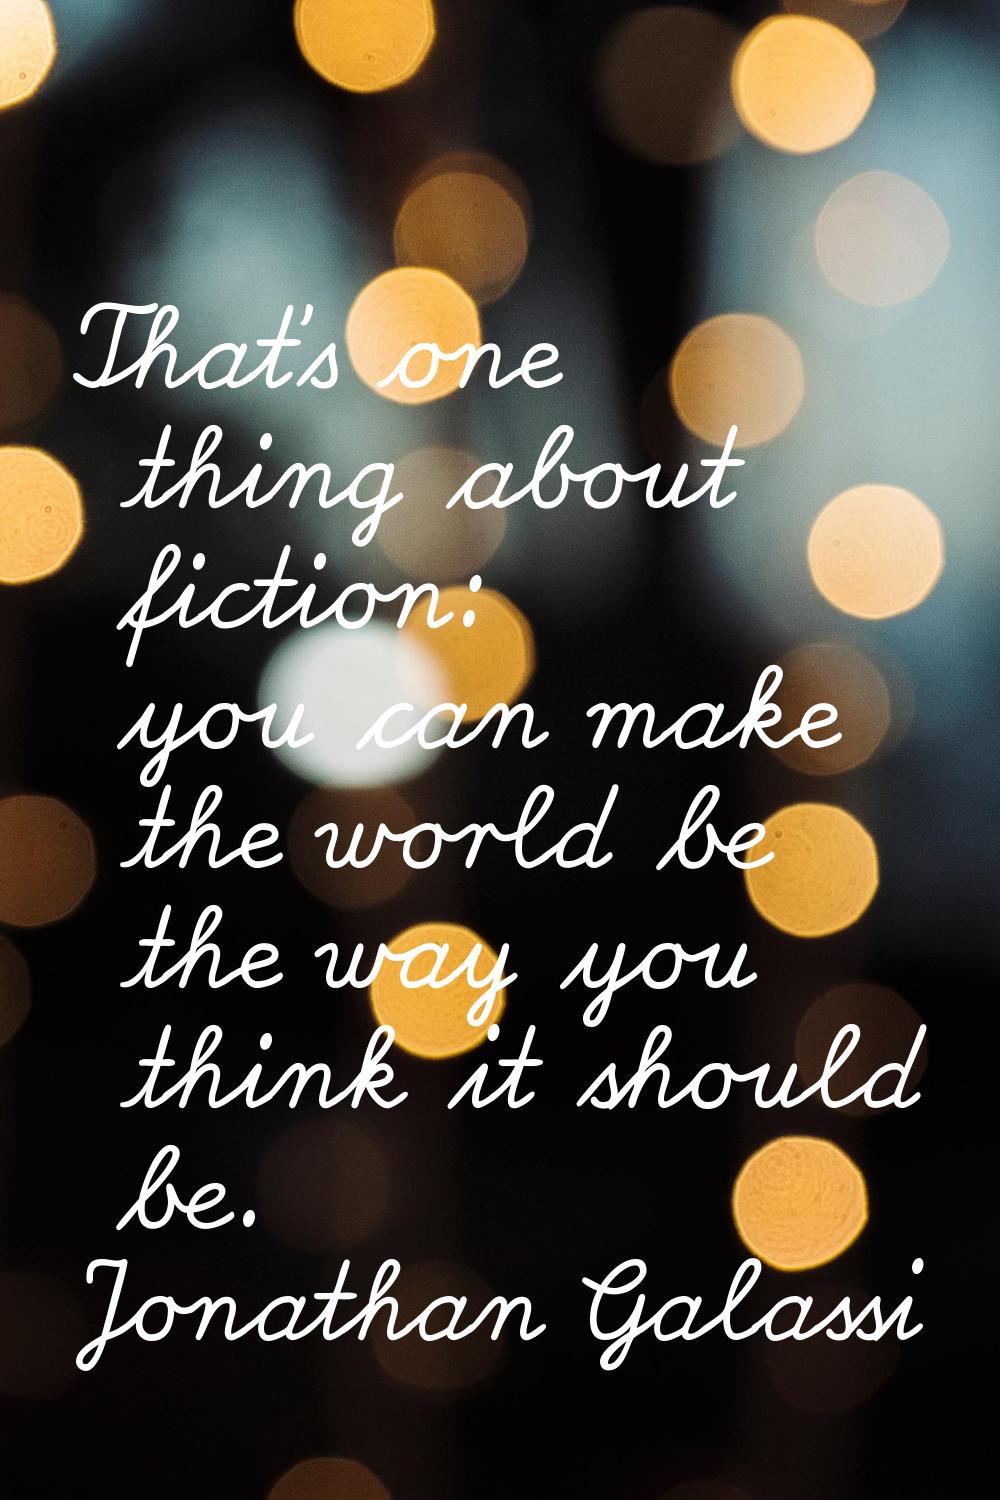 That's one thing about fiction: you can make the world be the way you think it should be.